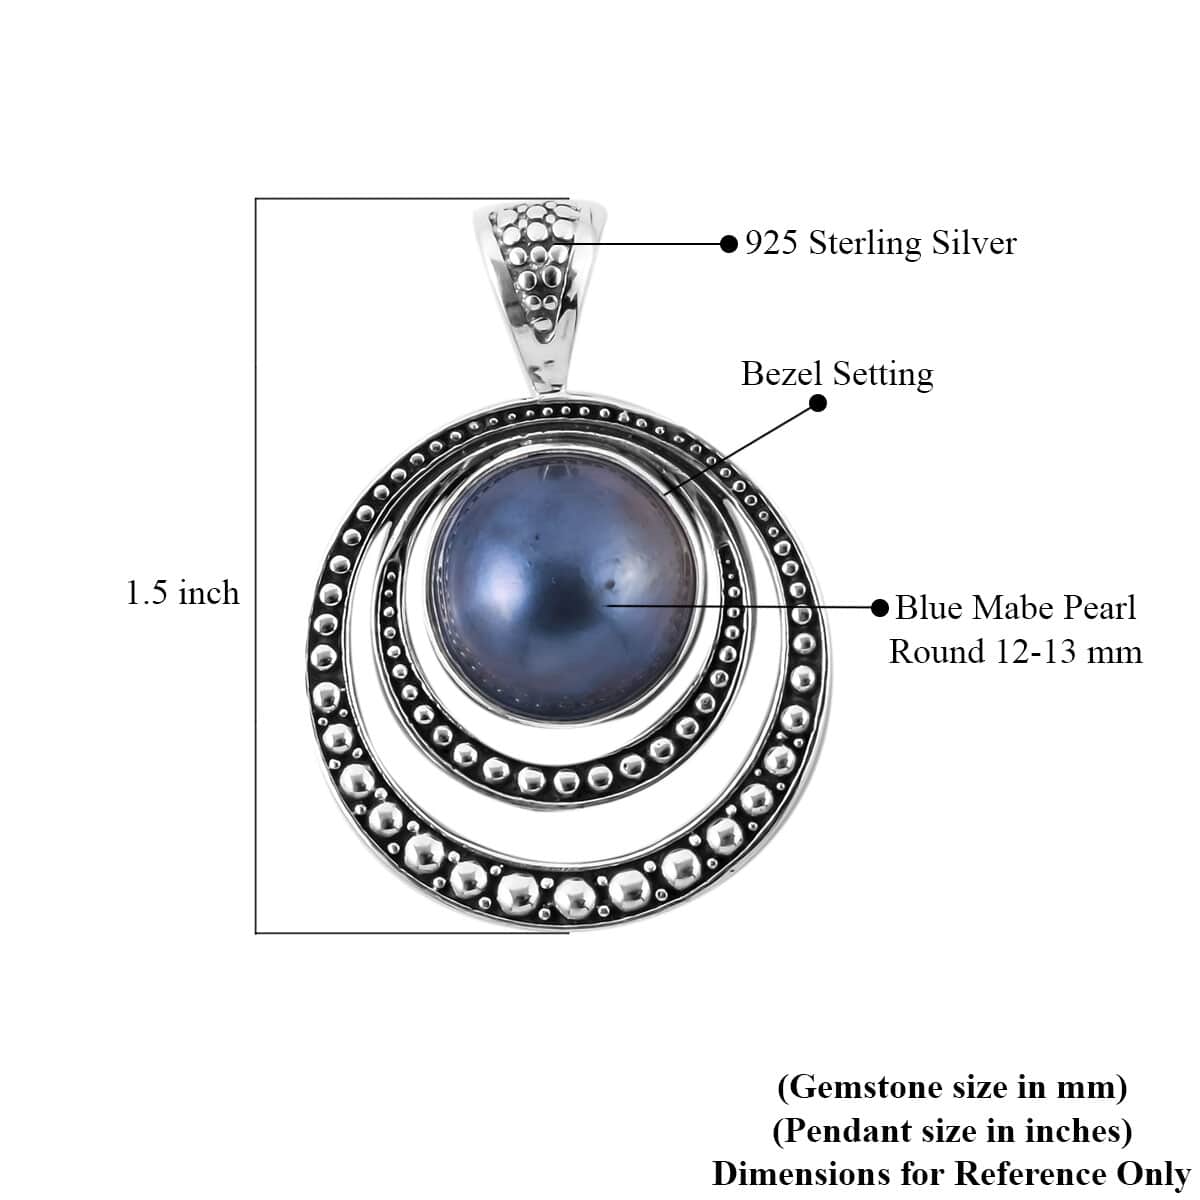 BALI LEGACY Blue Mabe Pearl 12-13mm Pendant in Sterling Silver 7 Grams image number 4